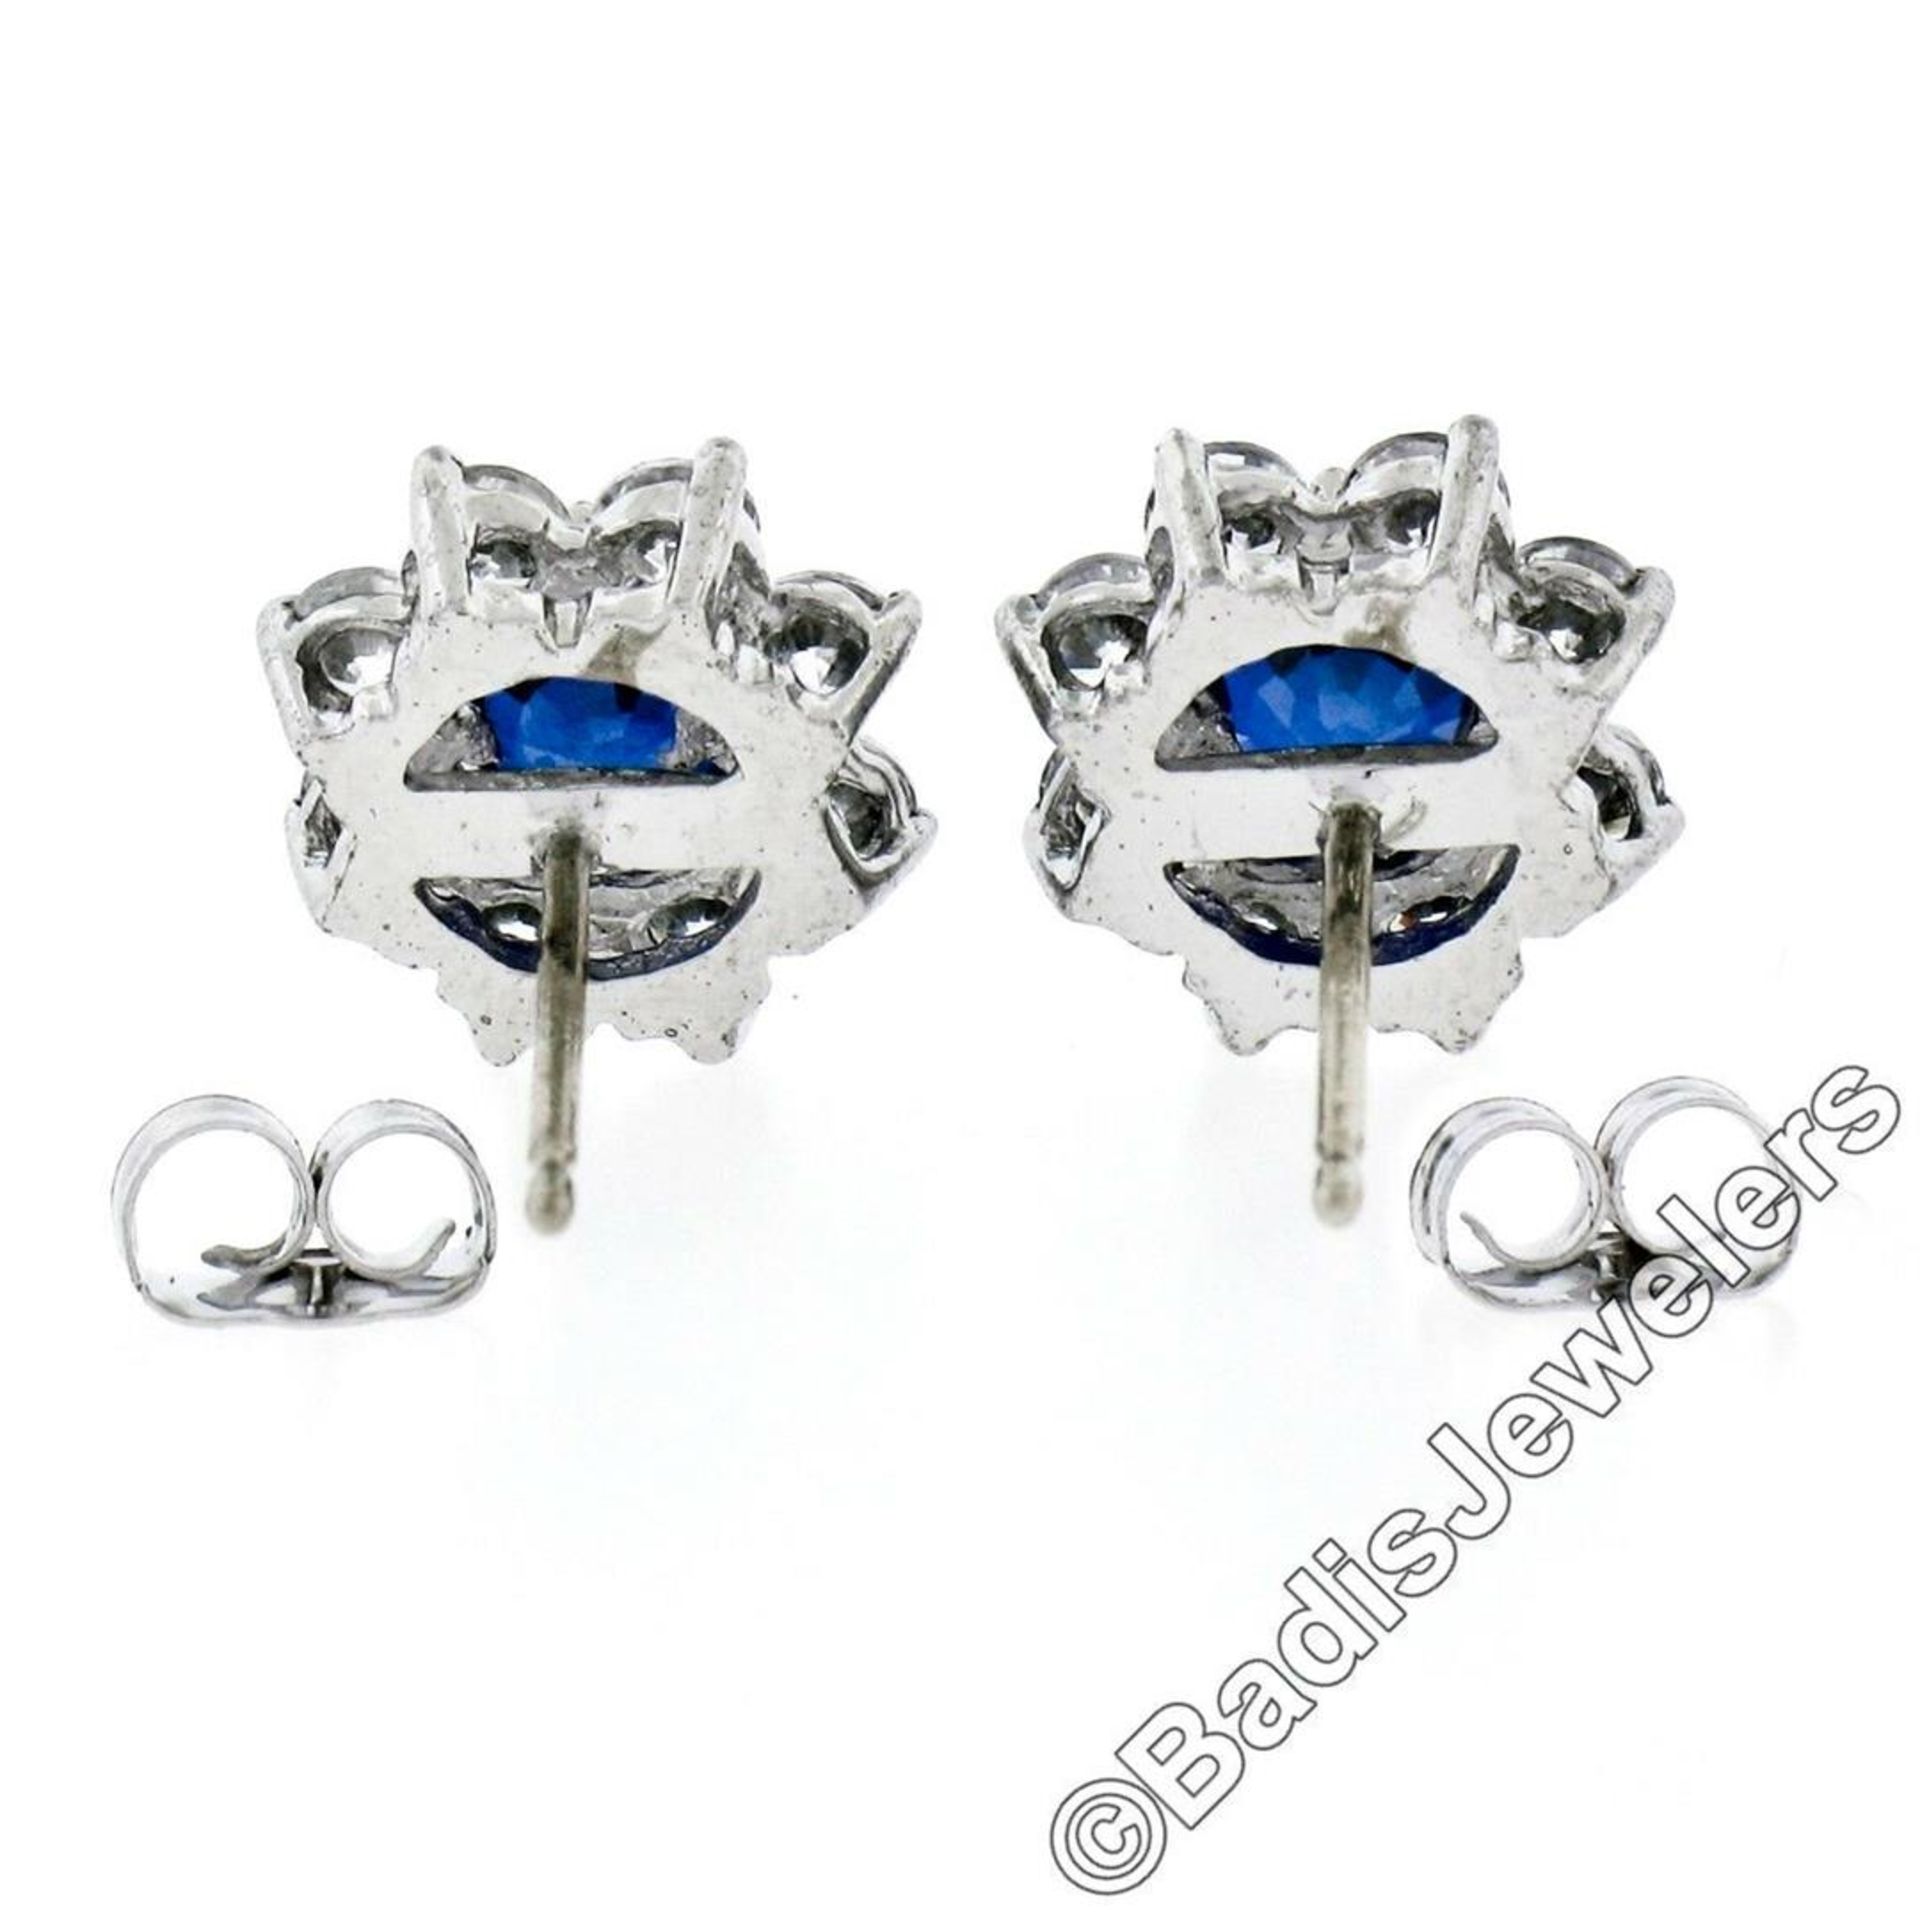 Sterling Silver Blue Crystal & CZ Halo Stud Earrings w/ 14kt White Gold Posts - Image 5 of 5